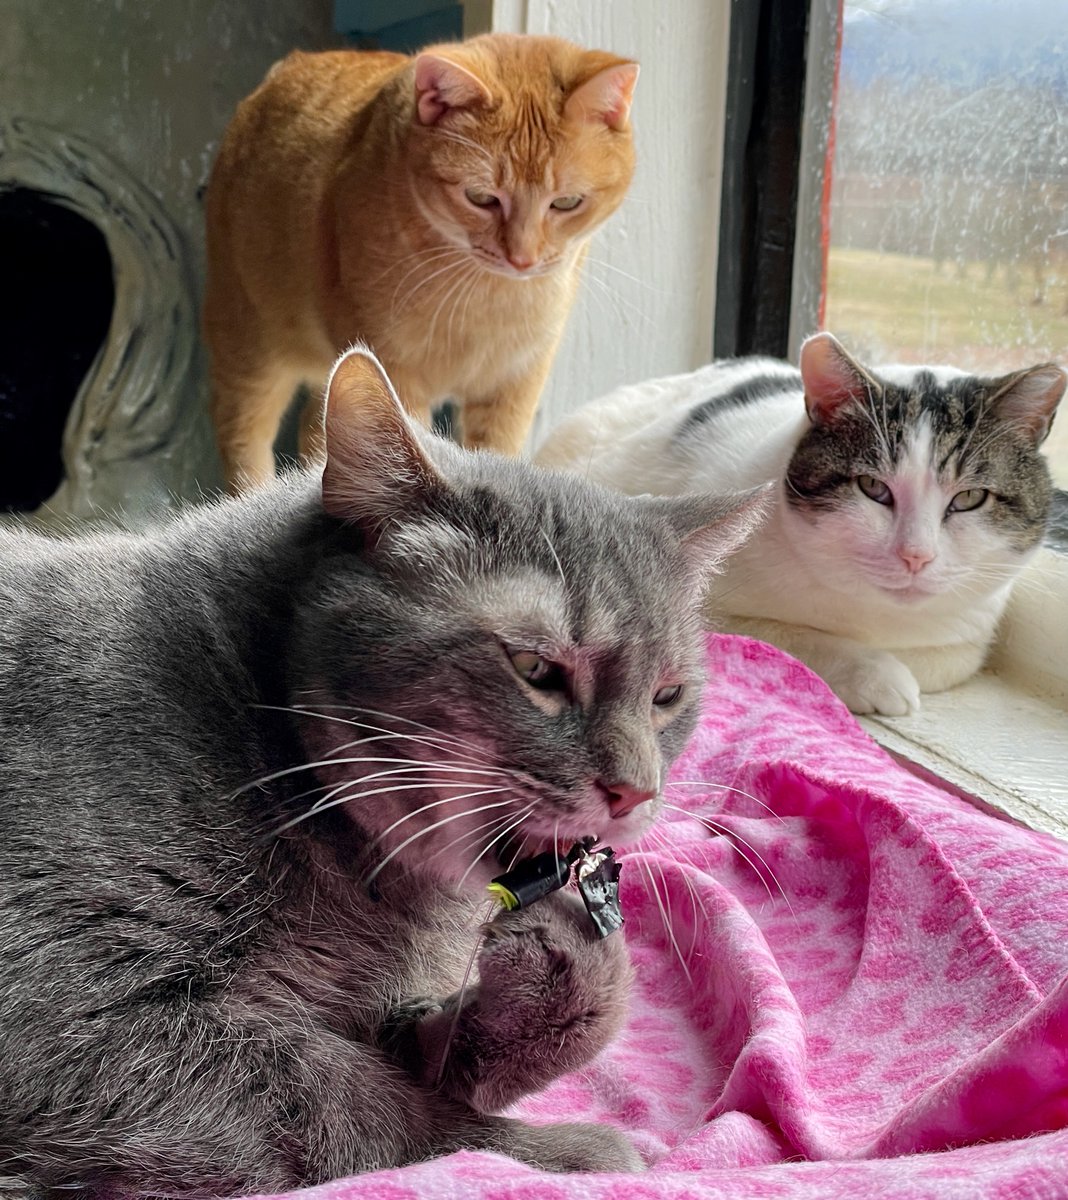 Dorian mutilated Room E's wand toy.
'AGAIN!'' said Shaw (after rolling his eyes.)
'We'll get another one,' we told them.
'It's discouraging,' sighed Marigold. 'I hope he's adopted soon.
Let's hope they're ALL adopted soon!😻
#StraysOfOurLives #cats #va #dc #virginia #friday #cute